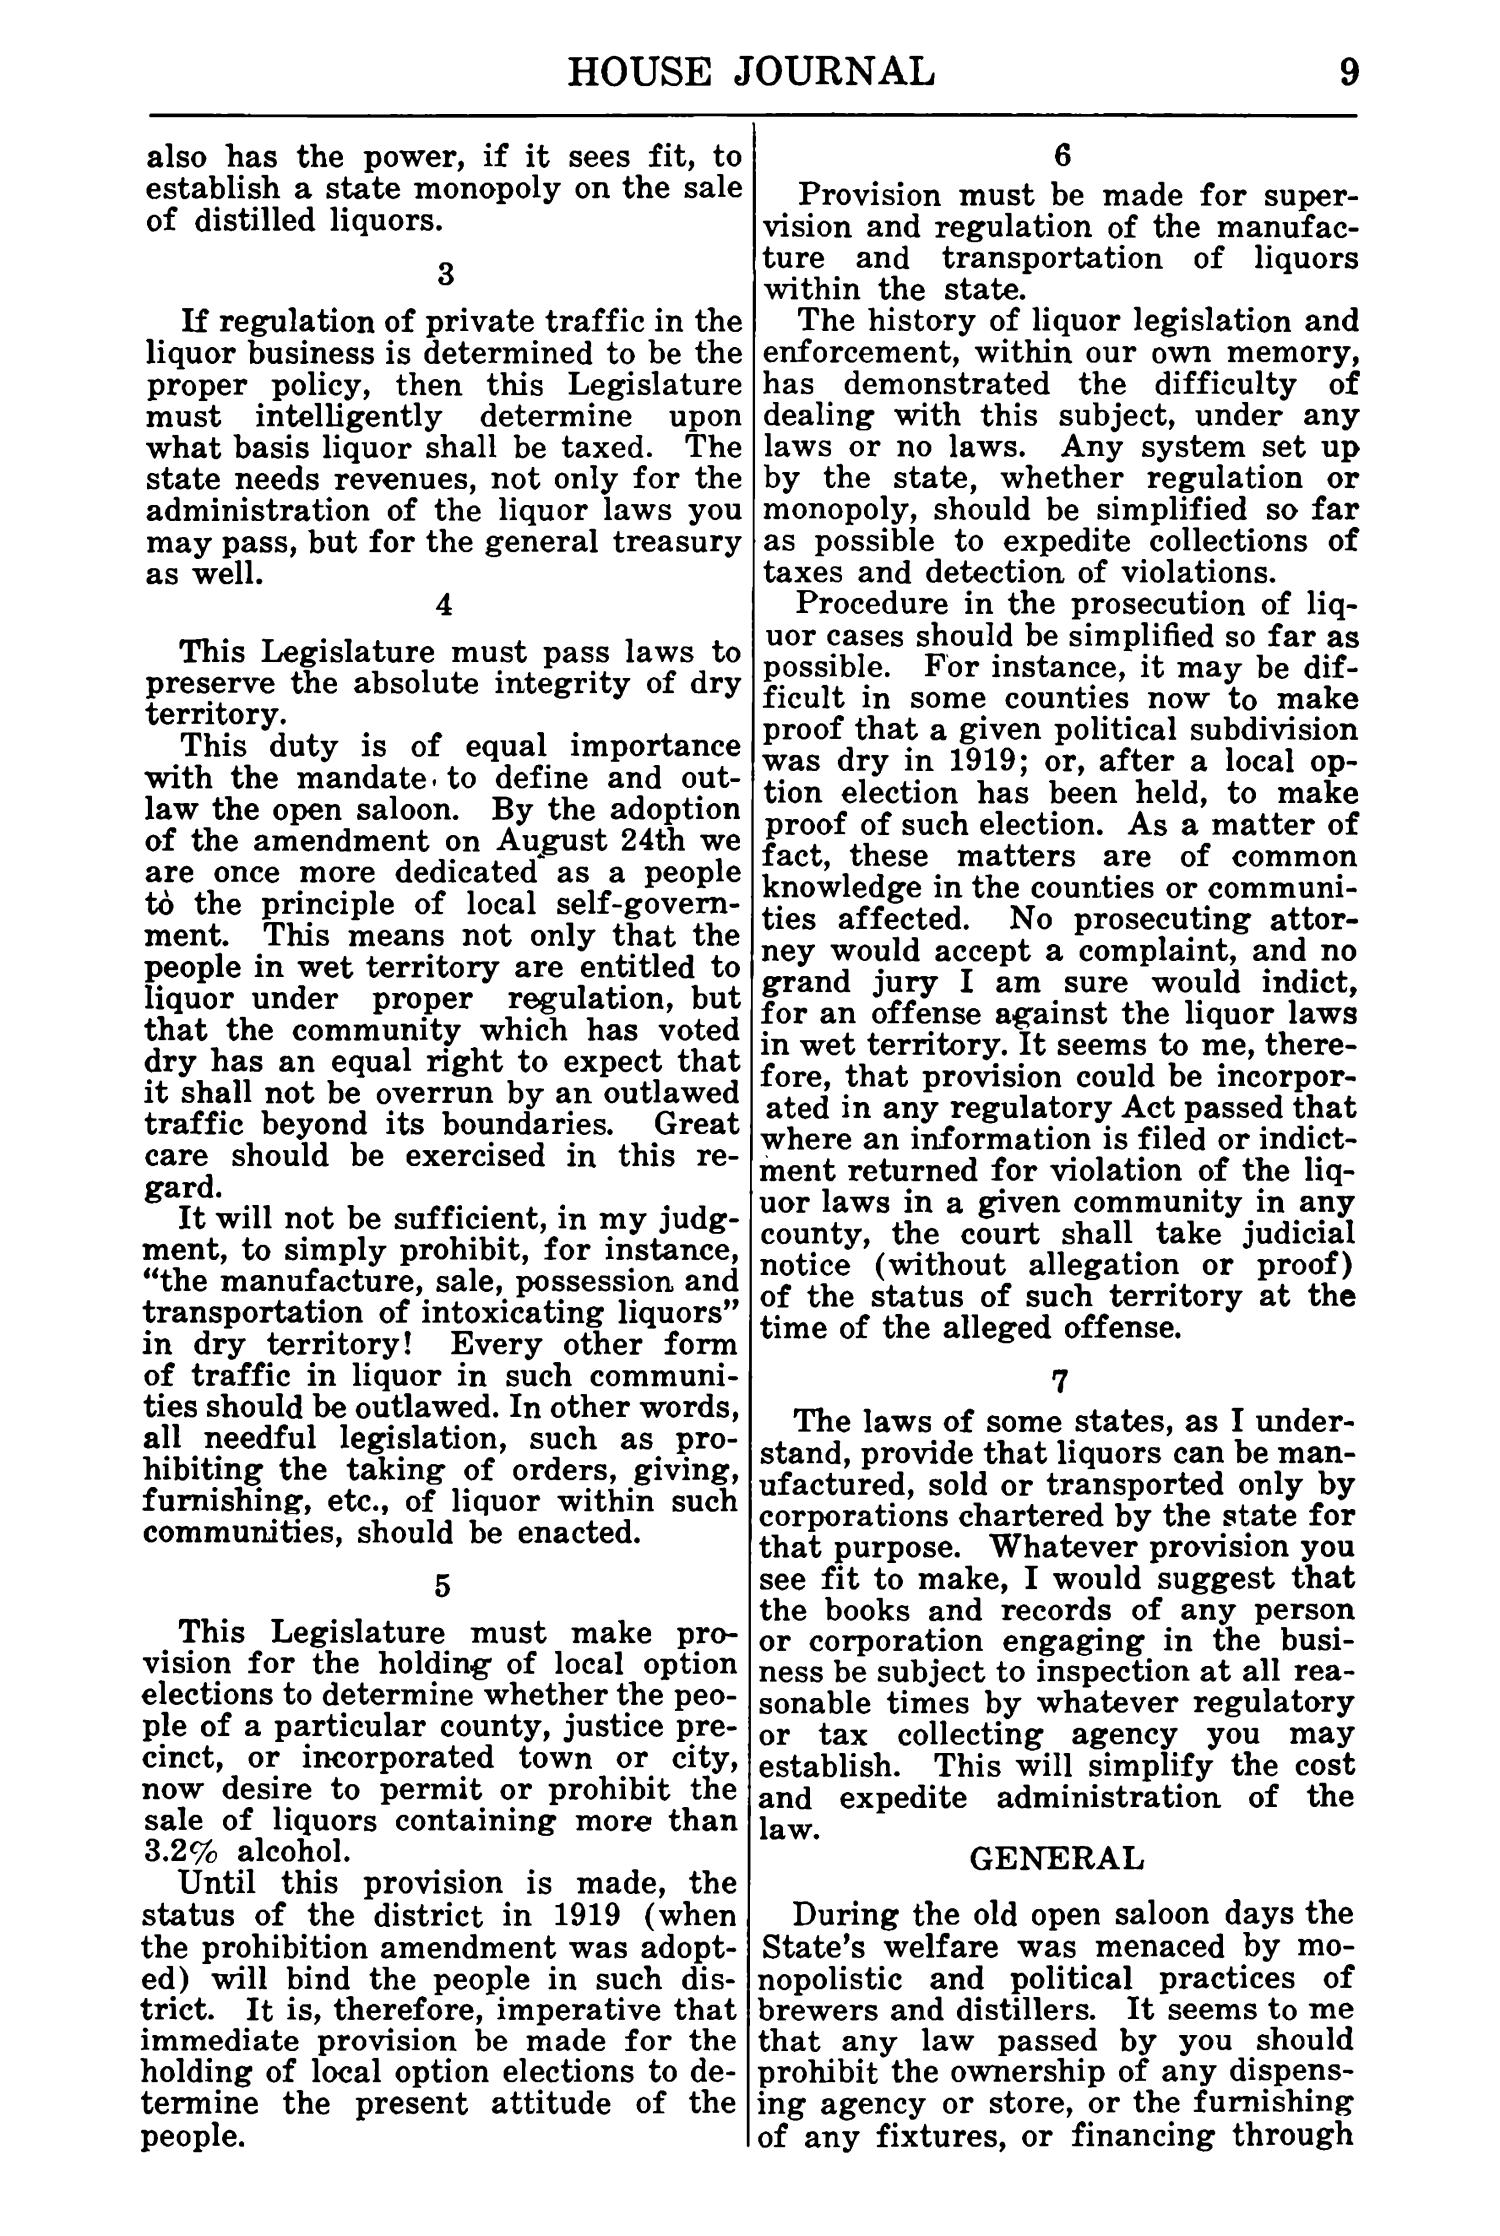 Journal of the House of Representatives of the First and Second Sessions of the Forty-Fourth Legislature of the State of Texas
                                                
                                                    9
                                                